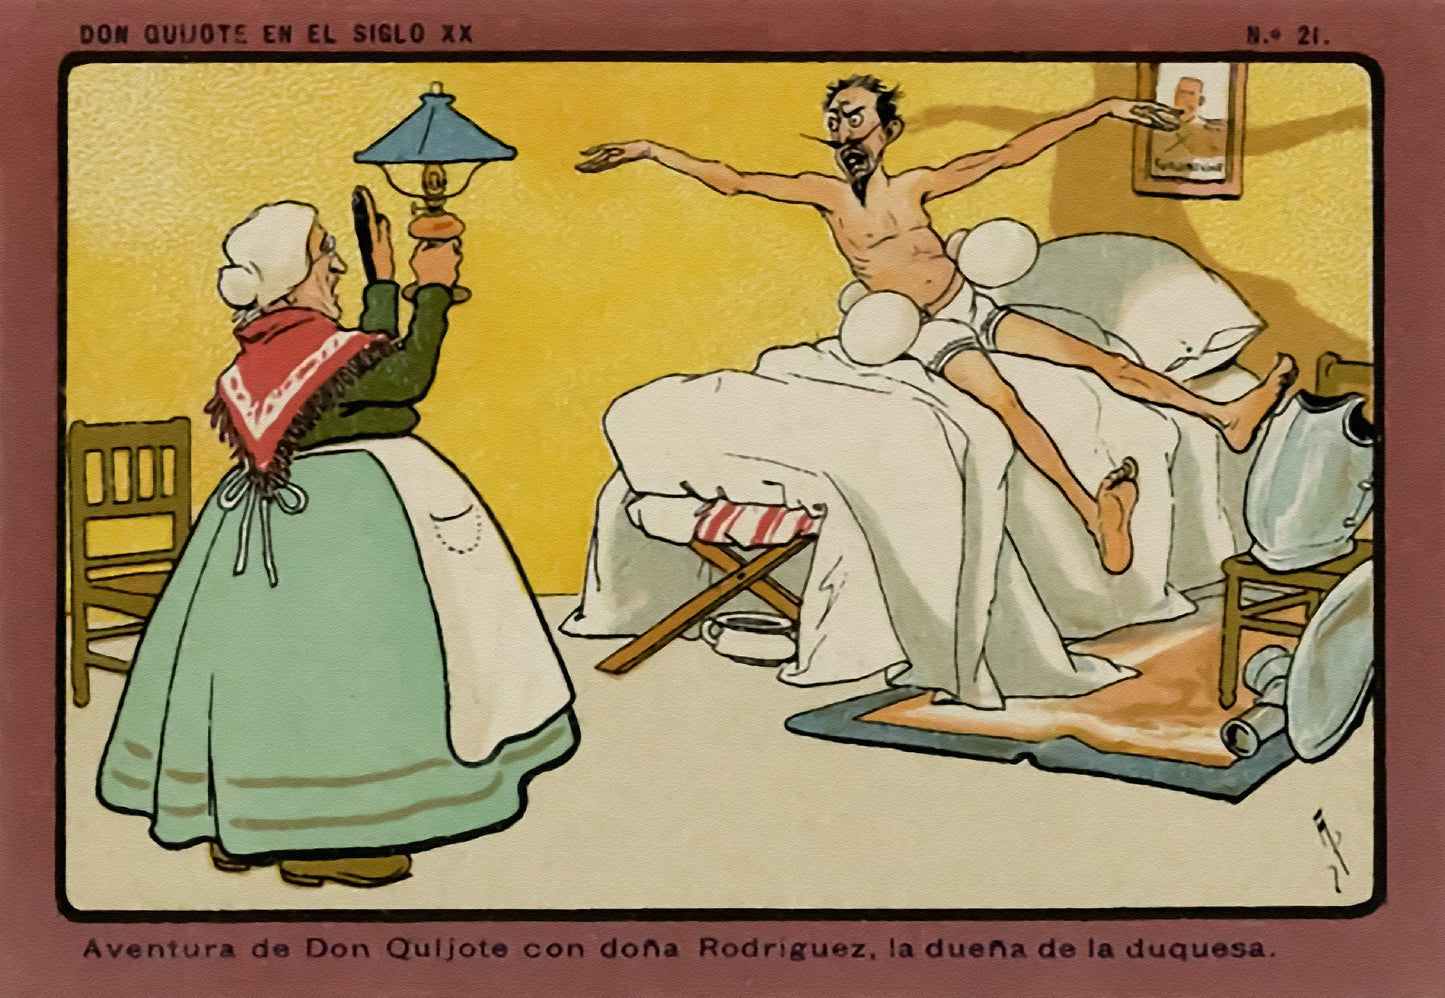 Don Quixote in the 20th Century Illustrations [25 Images]